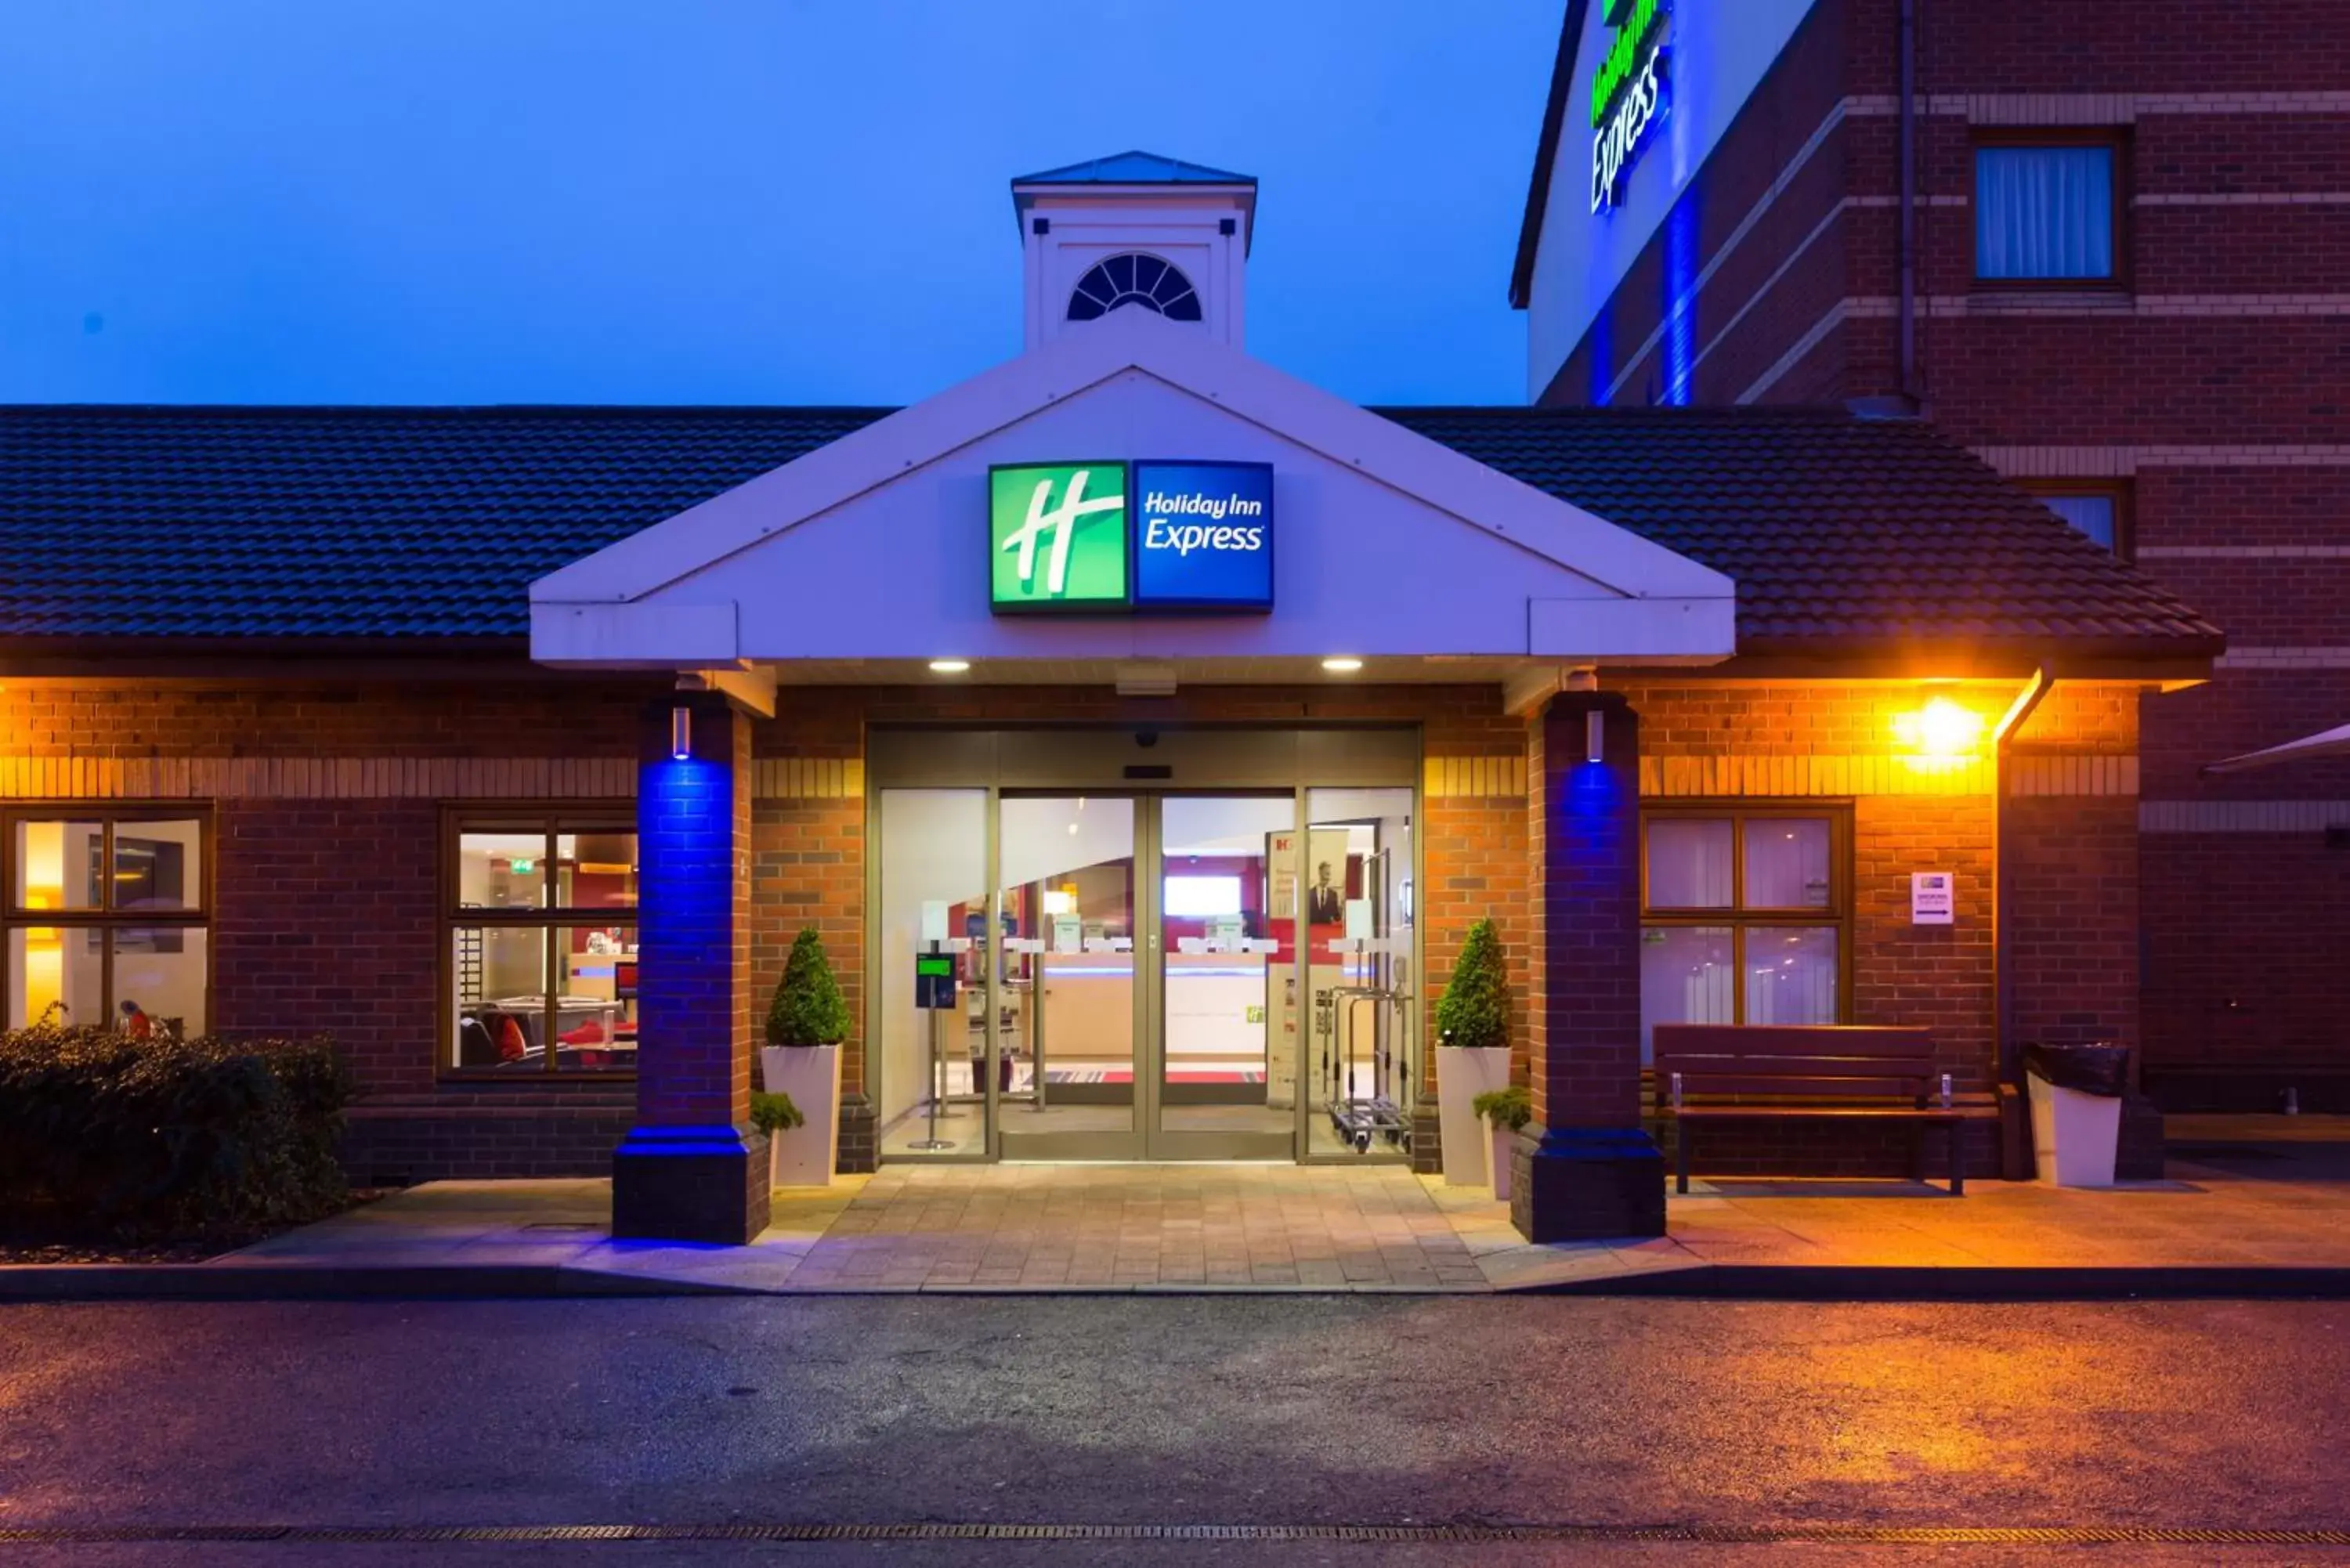 Property building in Holiday Inn Express Derby Pride Park, an IHG Hotel